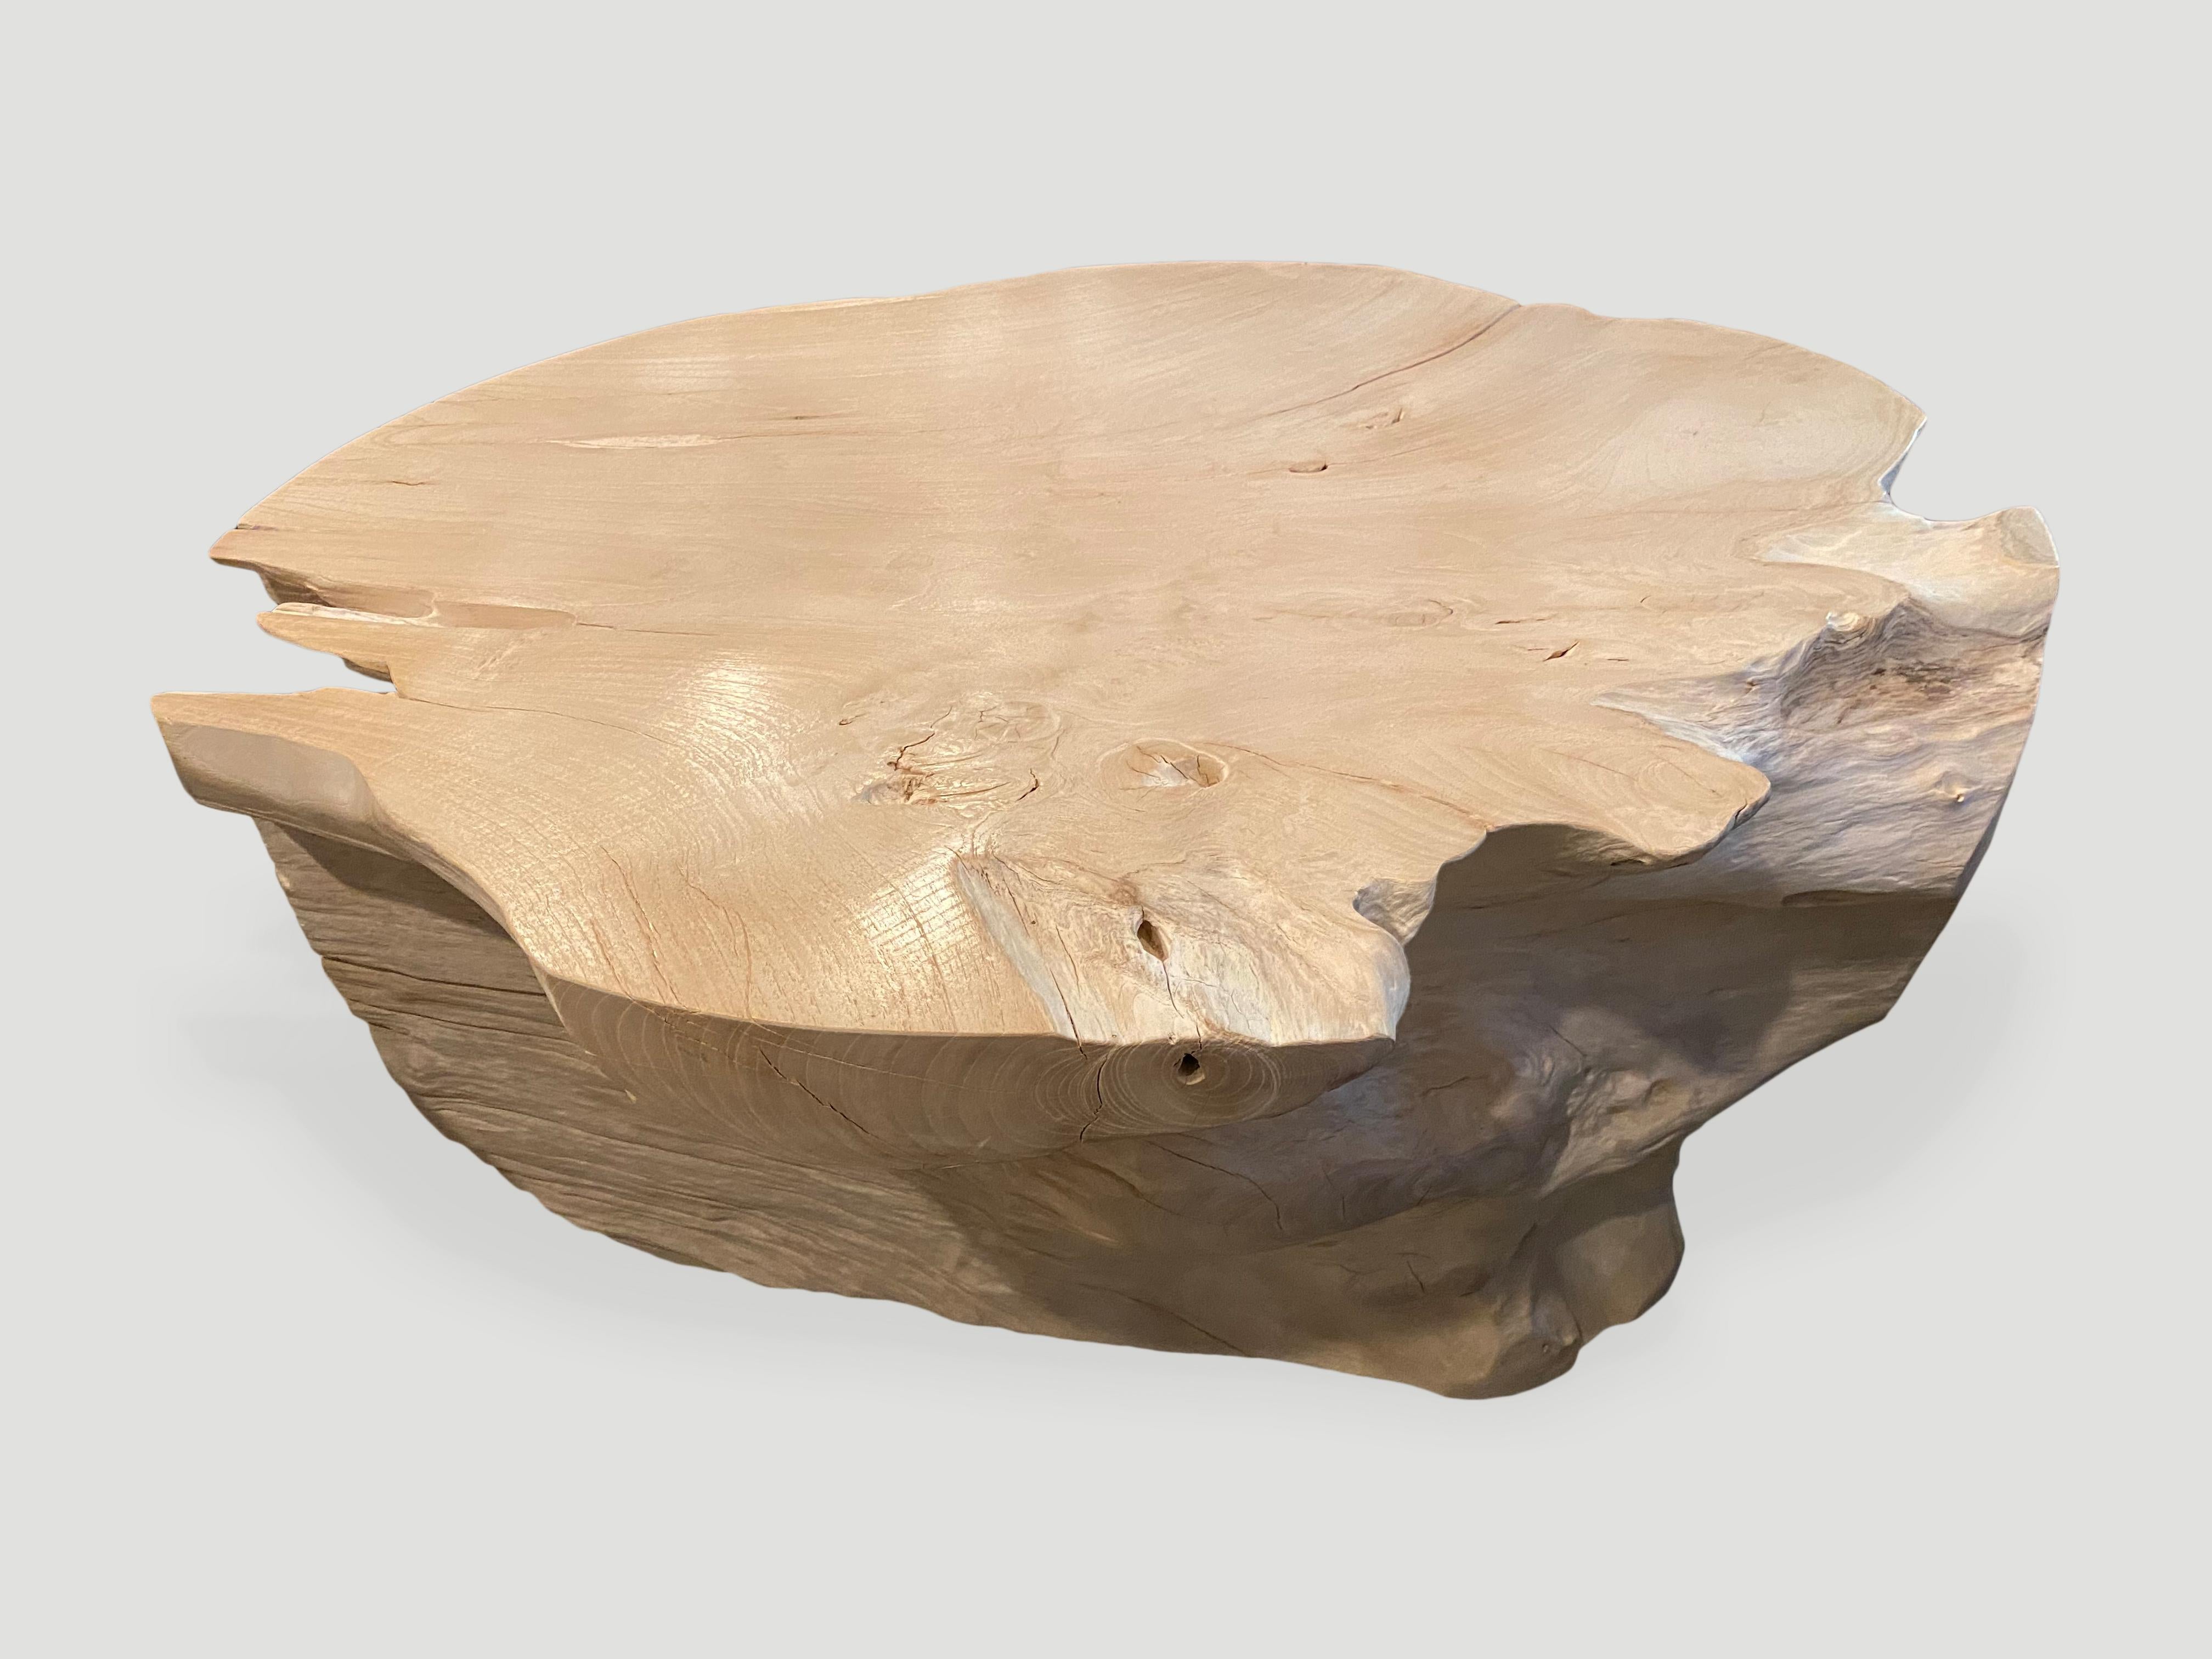 Beautiful single root organic coffee table with a relatively flat usable top. The reclaimed teak is bleached and left to bake in the sun and sea salt air for over a year to achieve this unique finish. We have added a light shellack to the top and